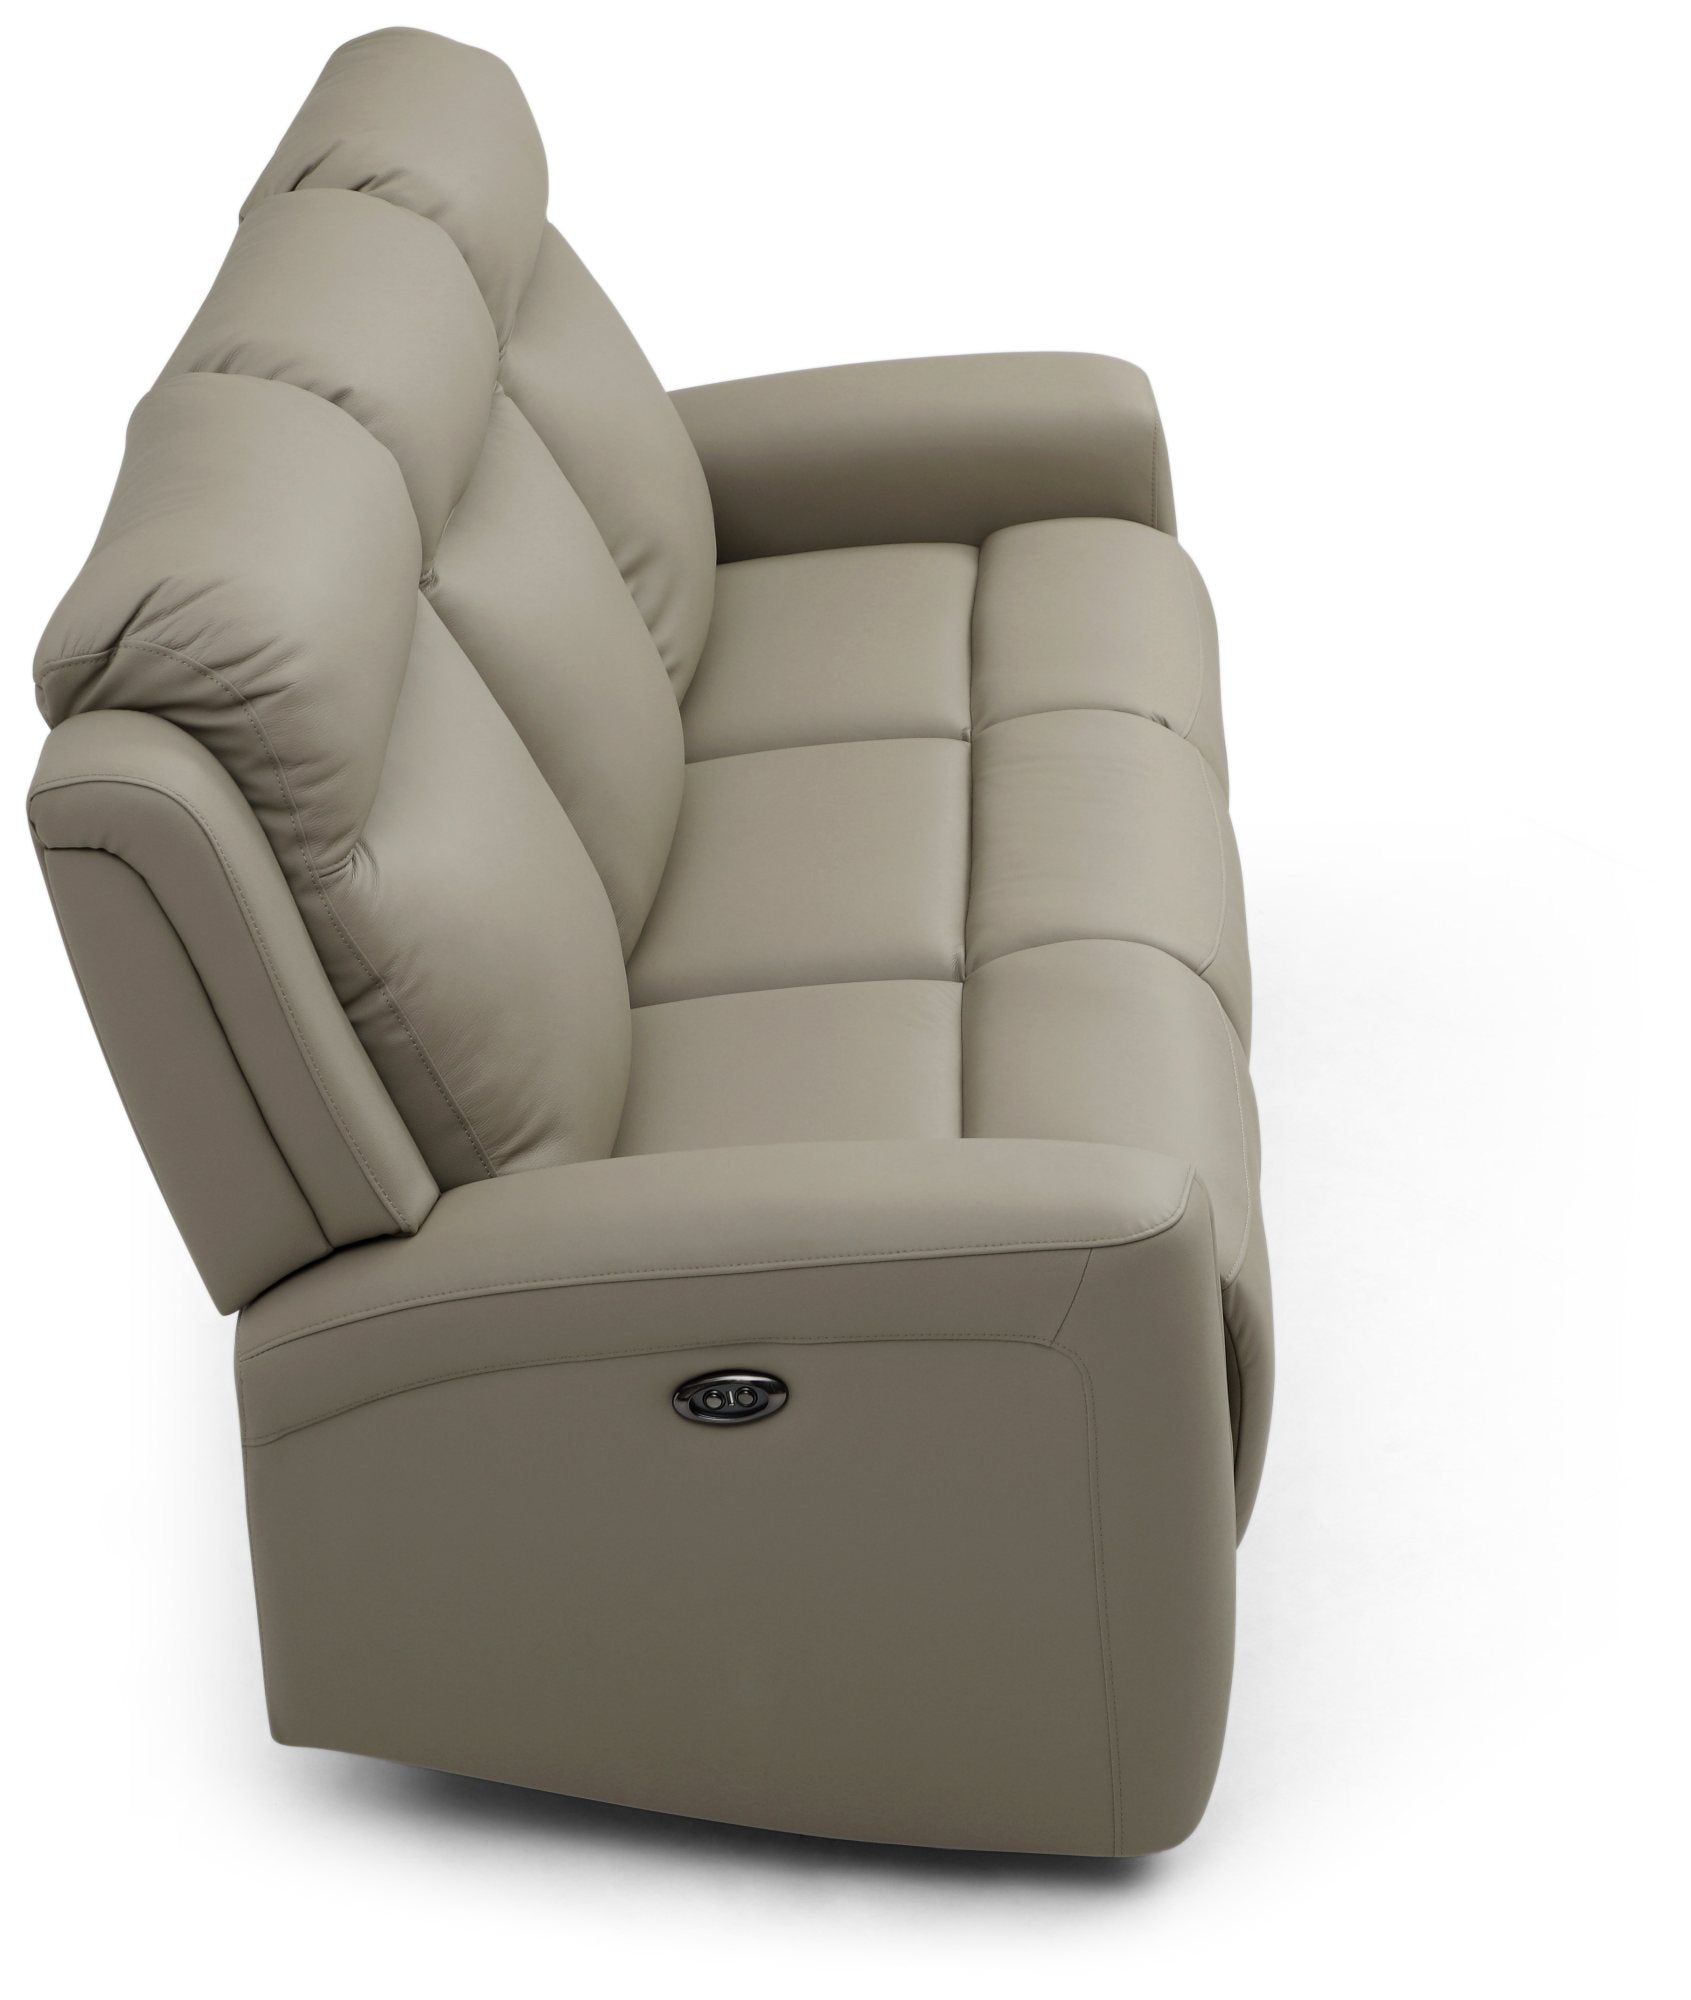 Bentley 3 Seater Taupe Leather Electric Recliner Sofa